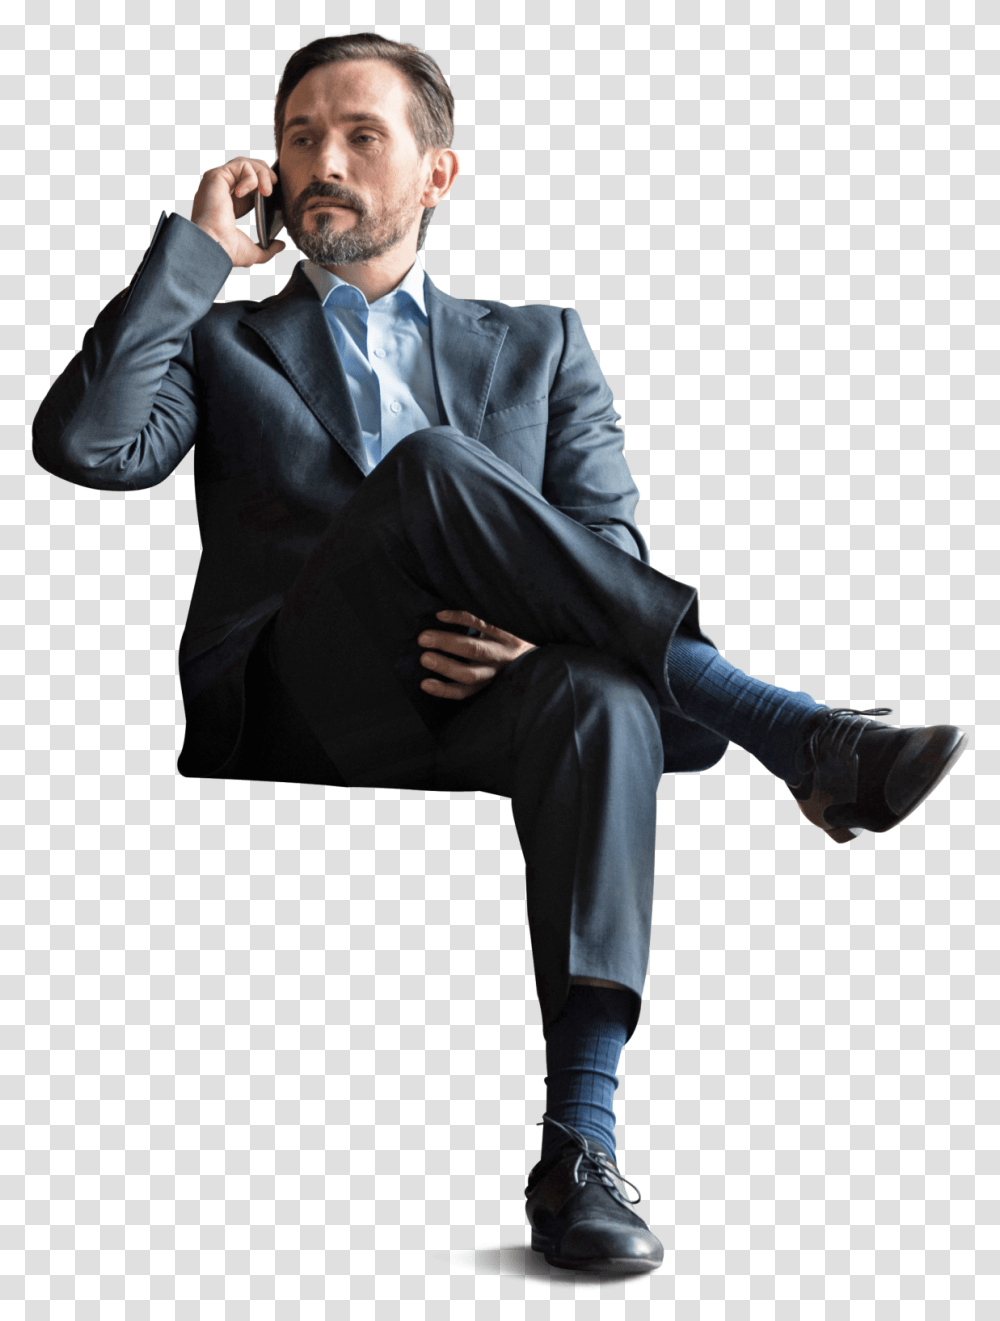 Office Businessman Sitting With Phone Cut Out Architecture People Sitting, Suit, Overcoat, Person Transparent Png